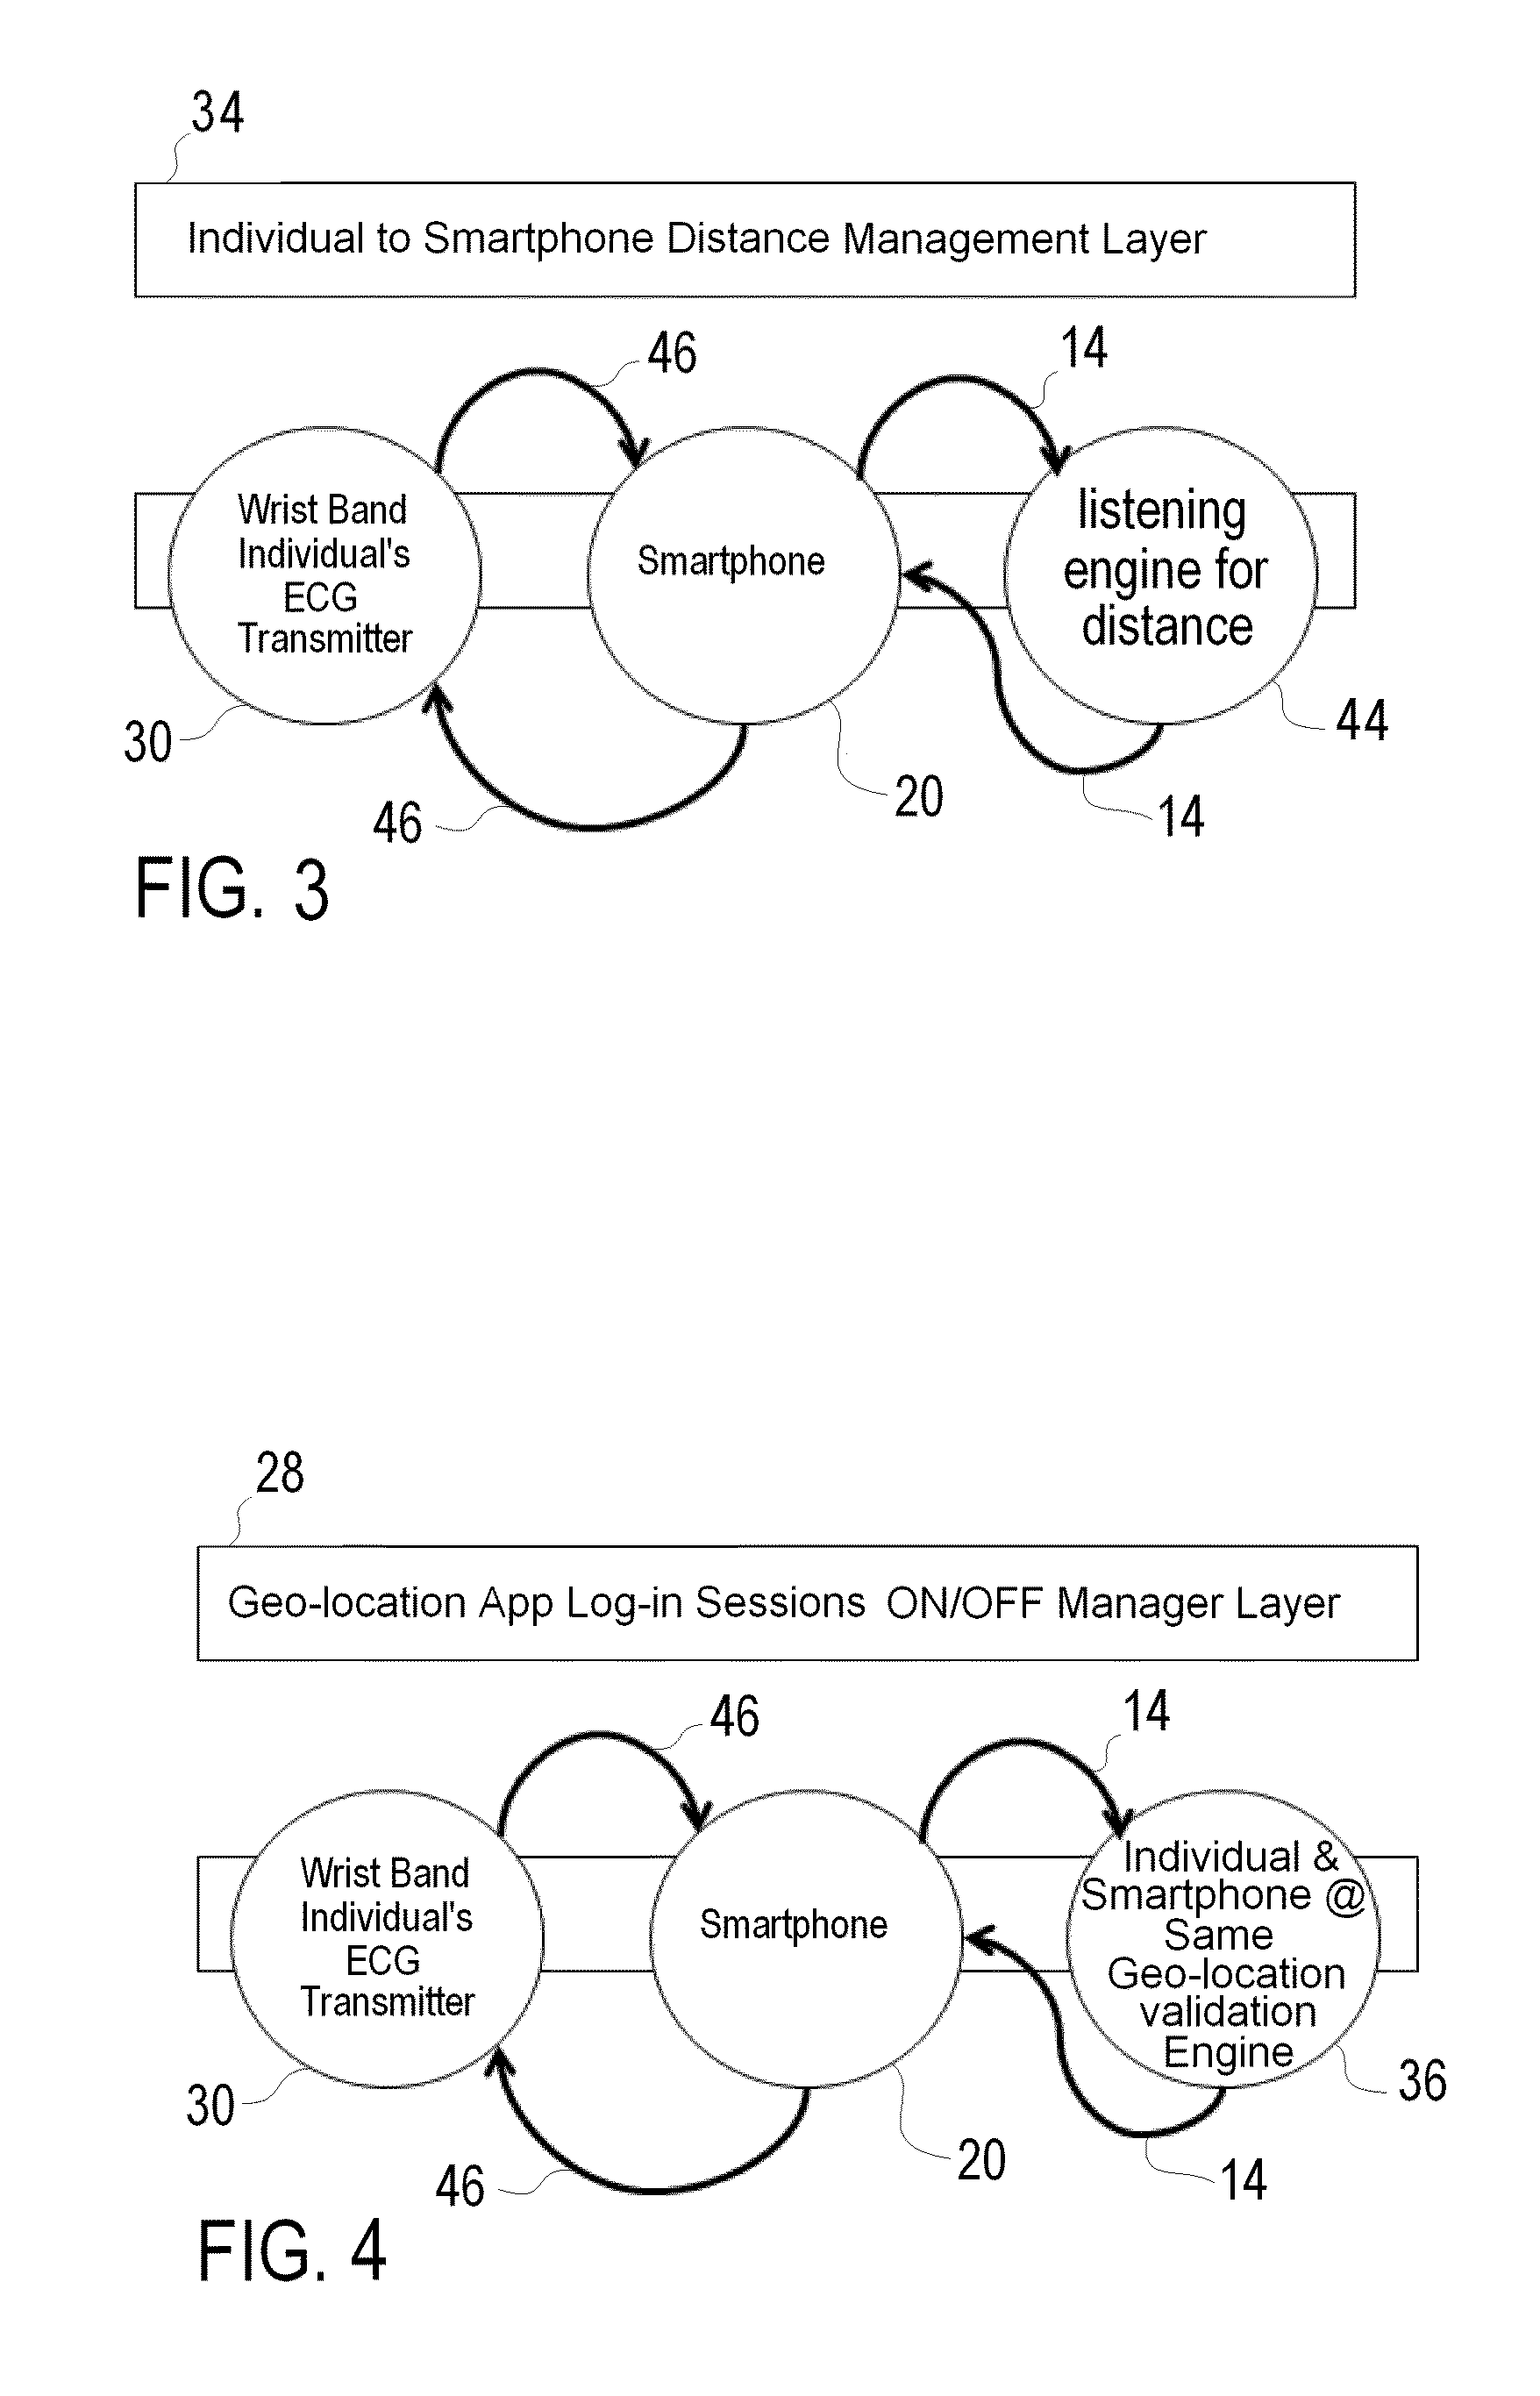 Method and System for Authenticating an Individual's Geo-Location Via a Communication Network and Applications Using the Same